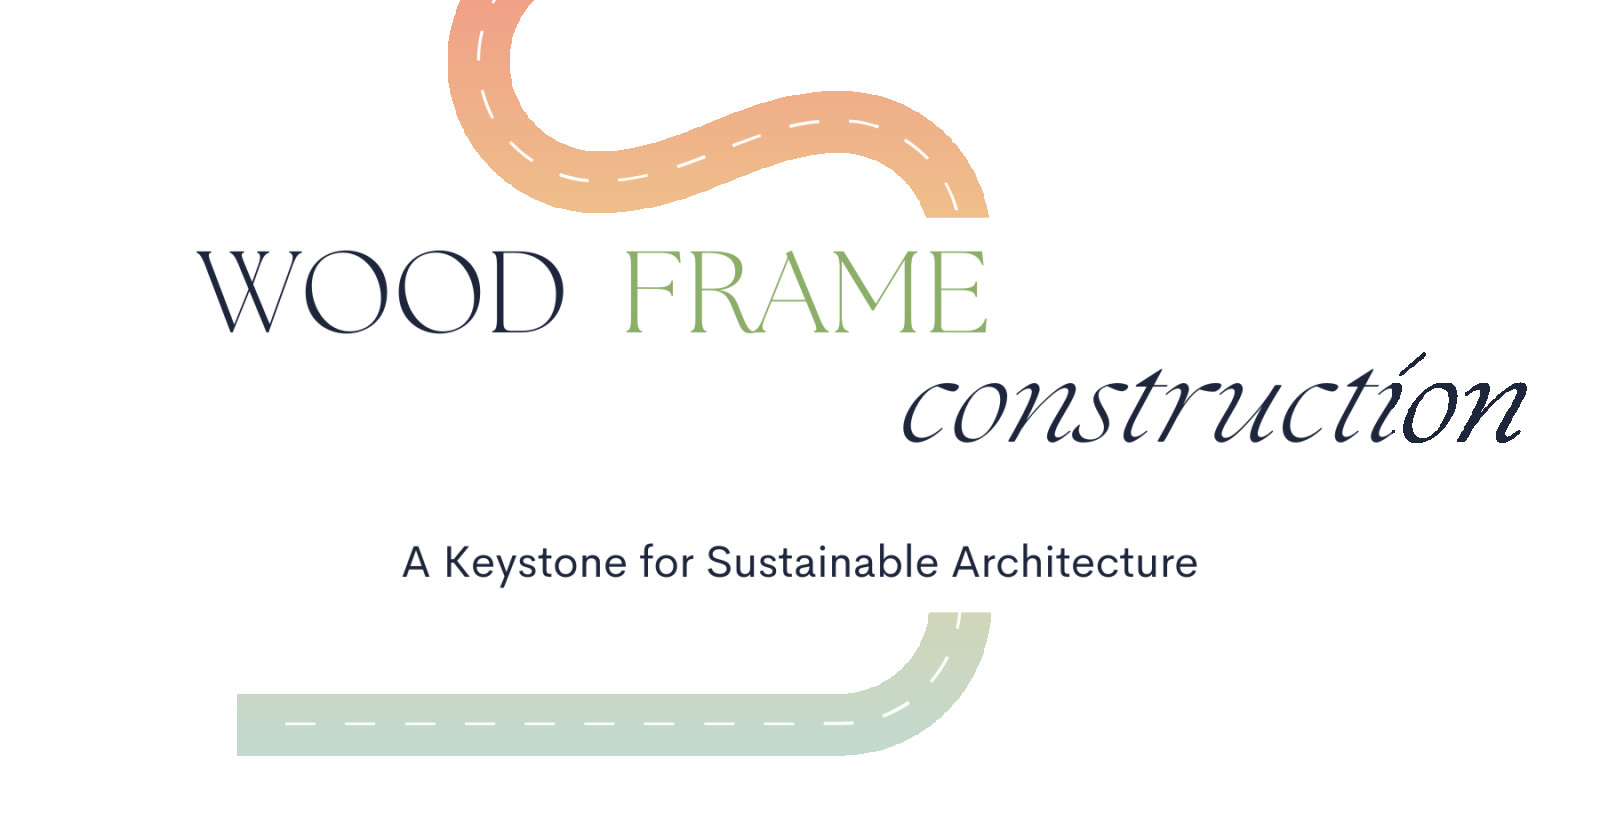 Wood Frame Construction: A Keystone for Sustainable Architecture